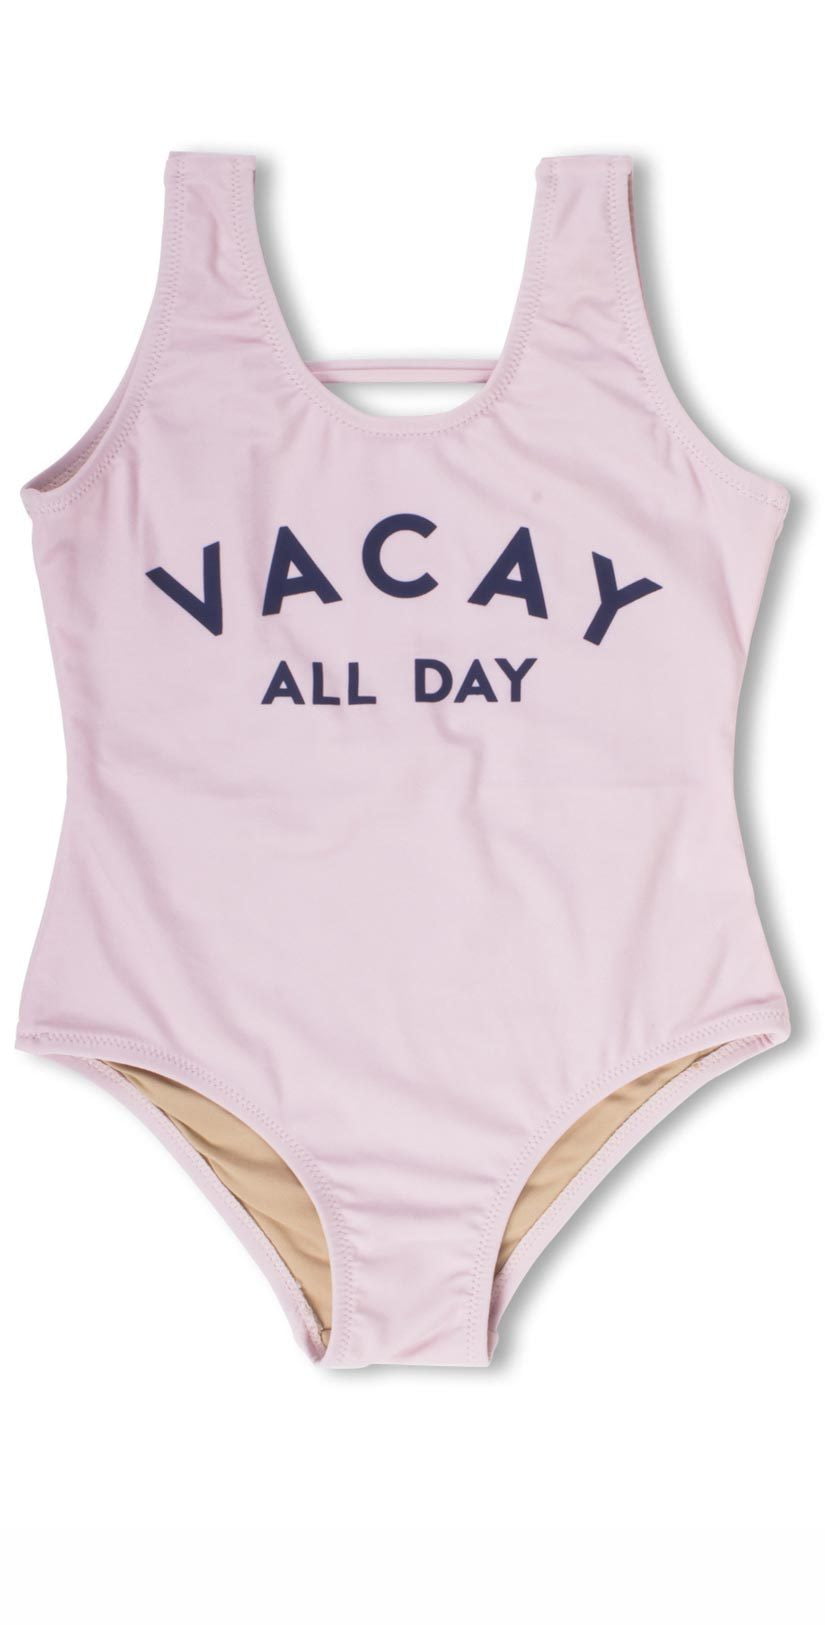 Shade Critters Vacay All Day One Piece Swimsuit in Pink SG01A-042: